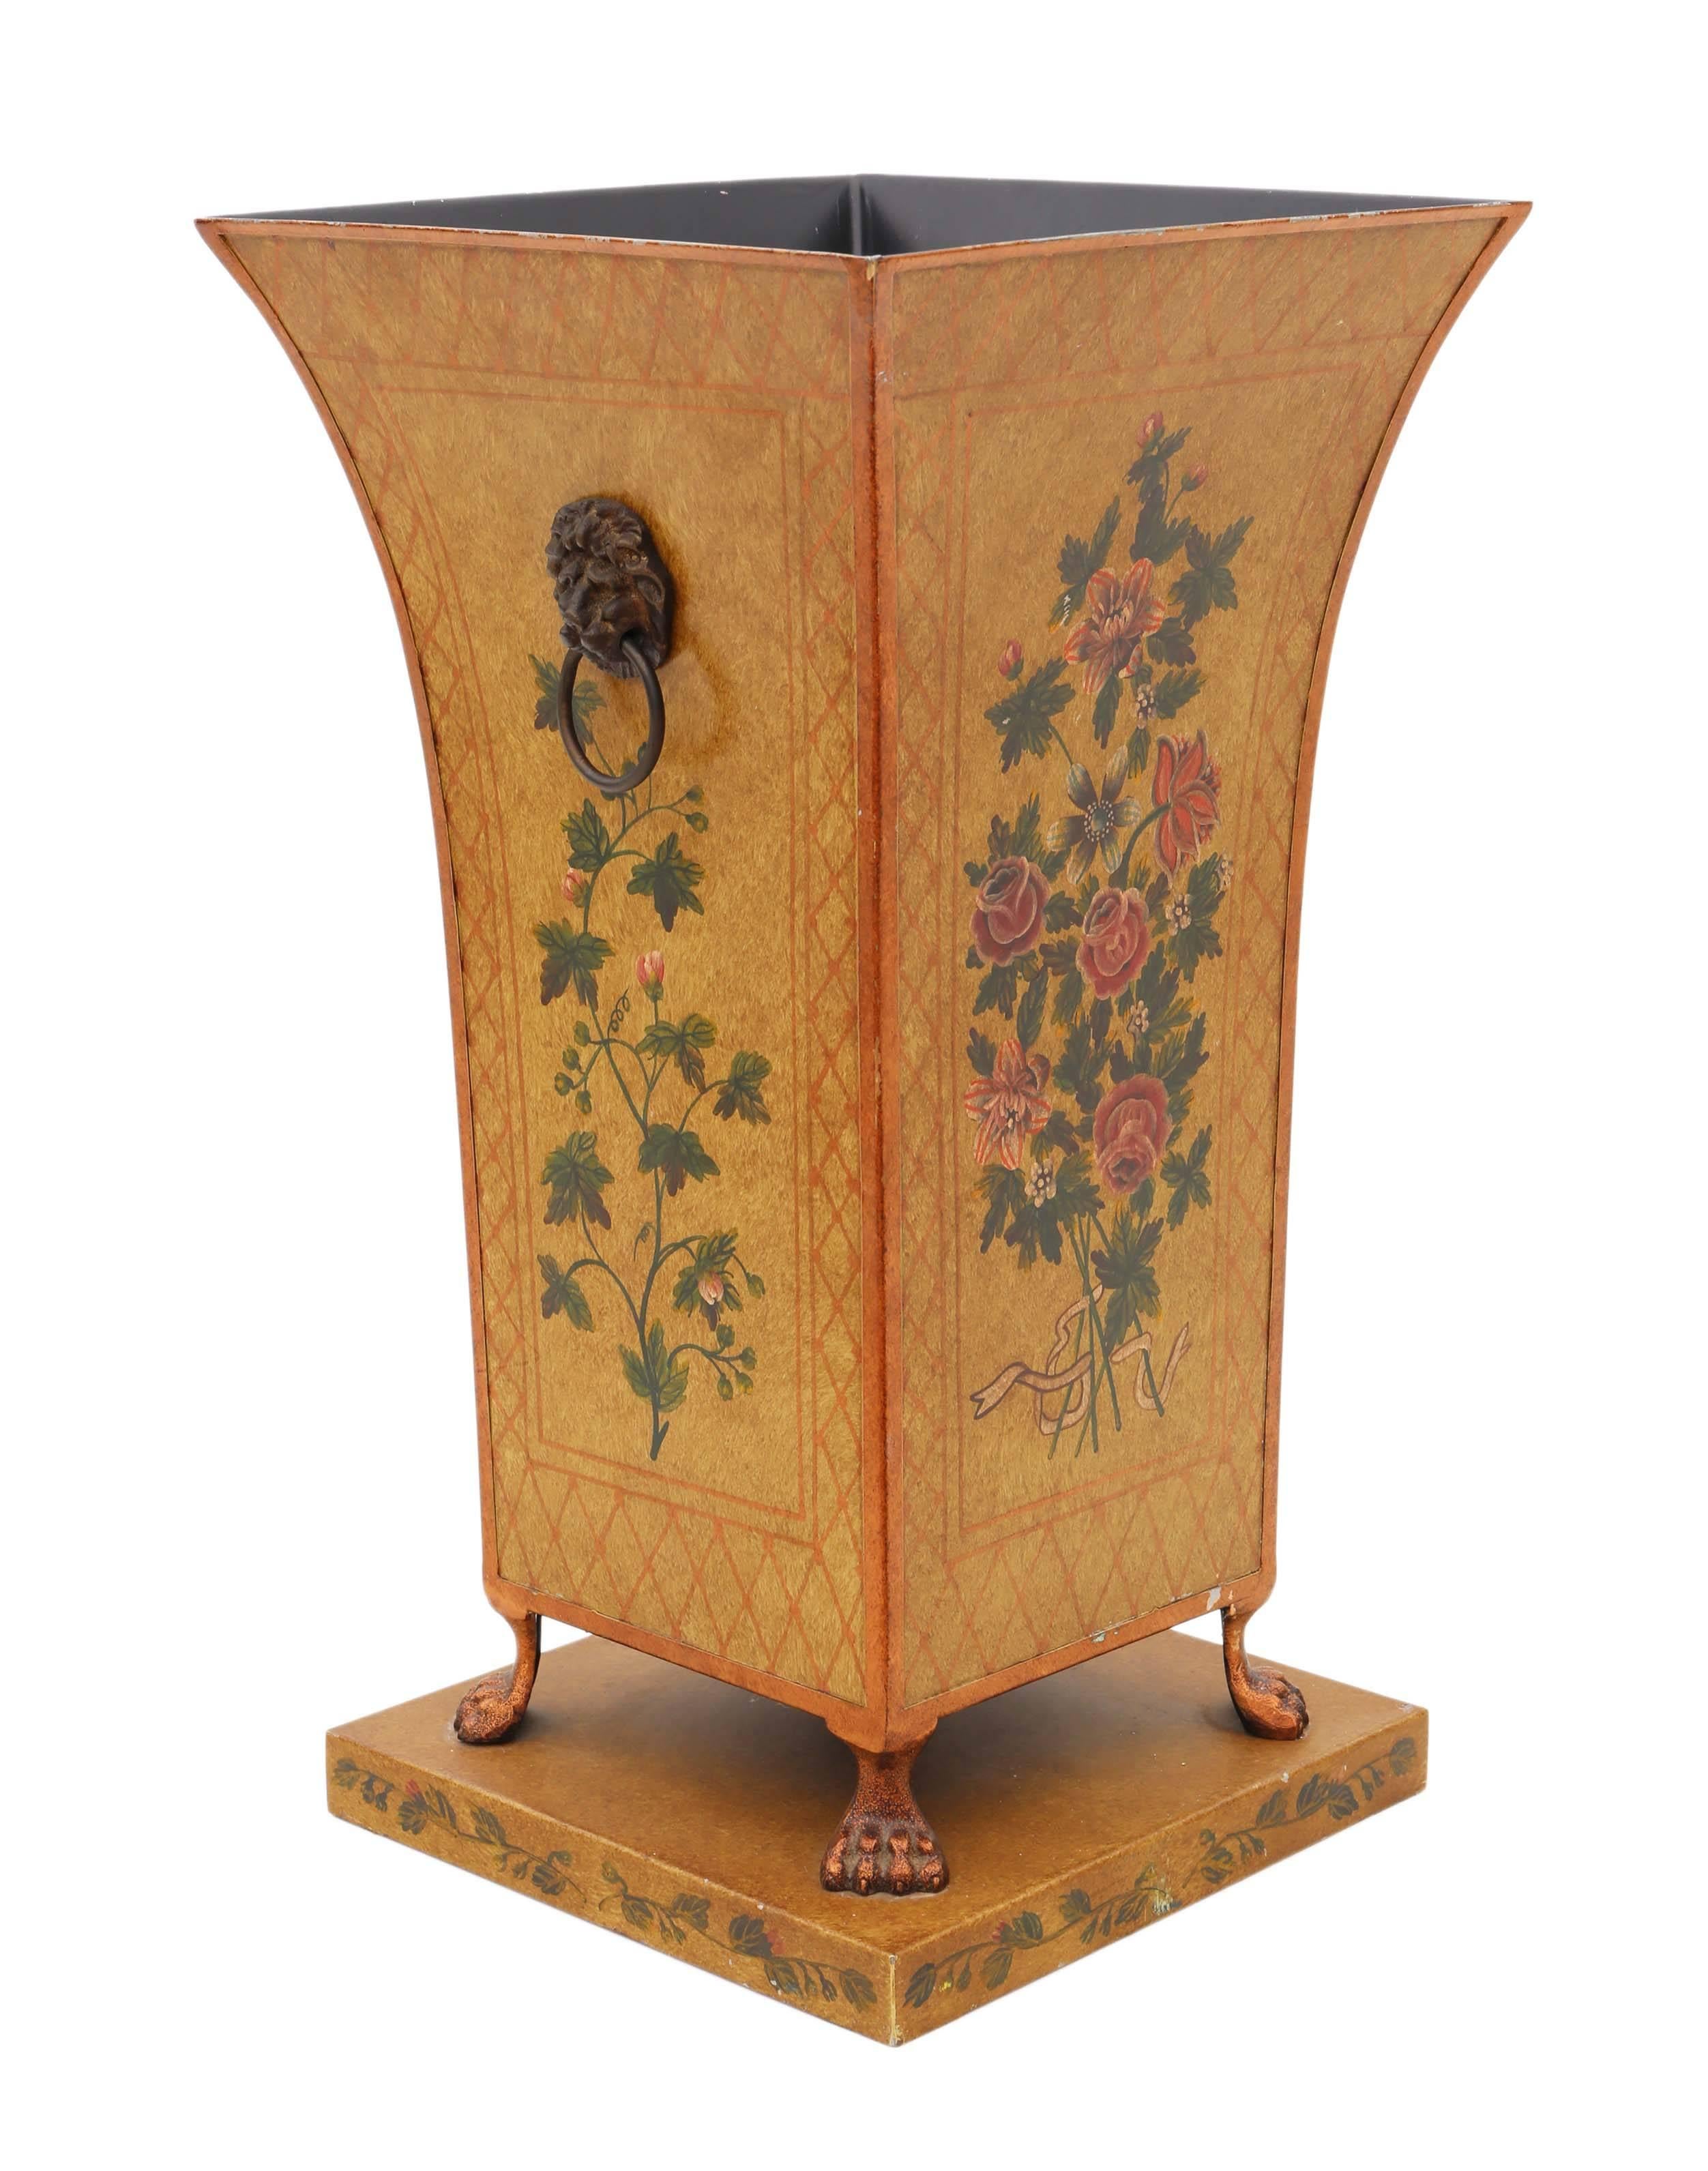 Antique Style Painted Decorated Steel Stick Umbrella Stand In Good Condition For Sale In Wisbech, Walton Wisbech